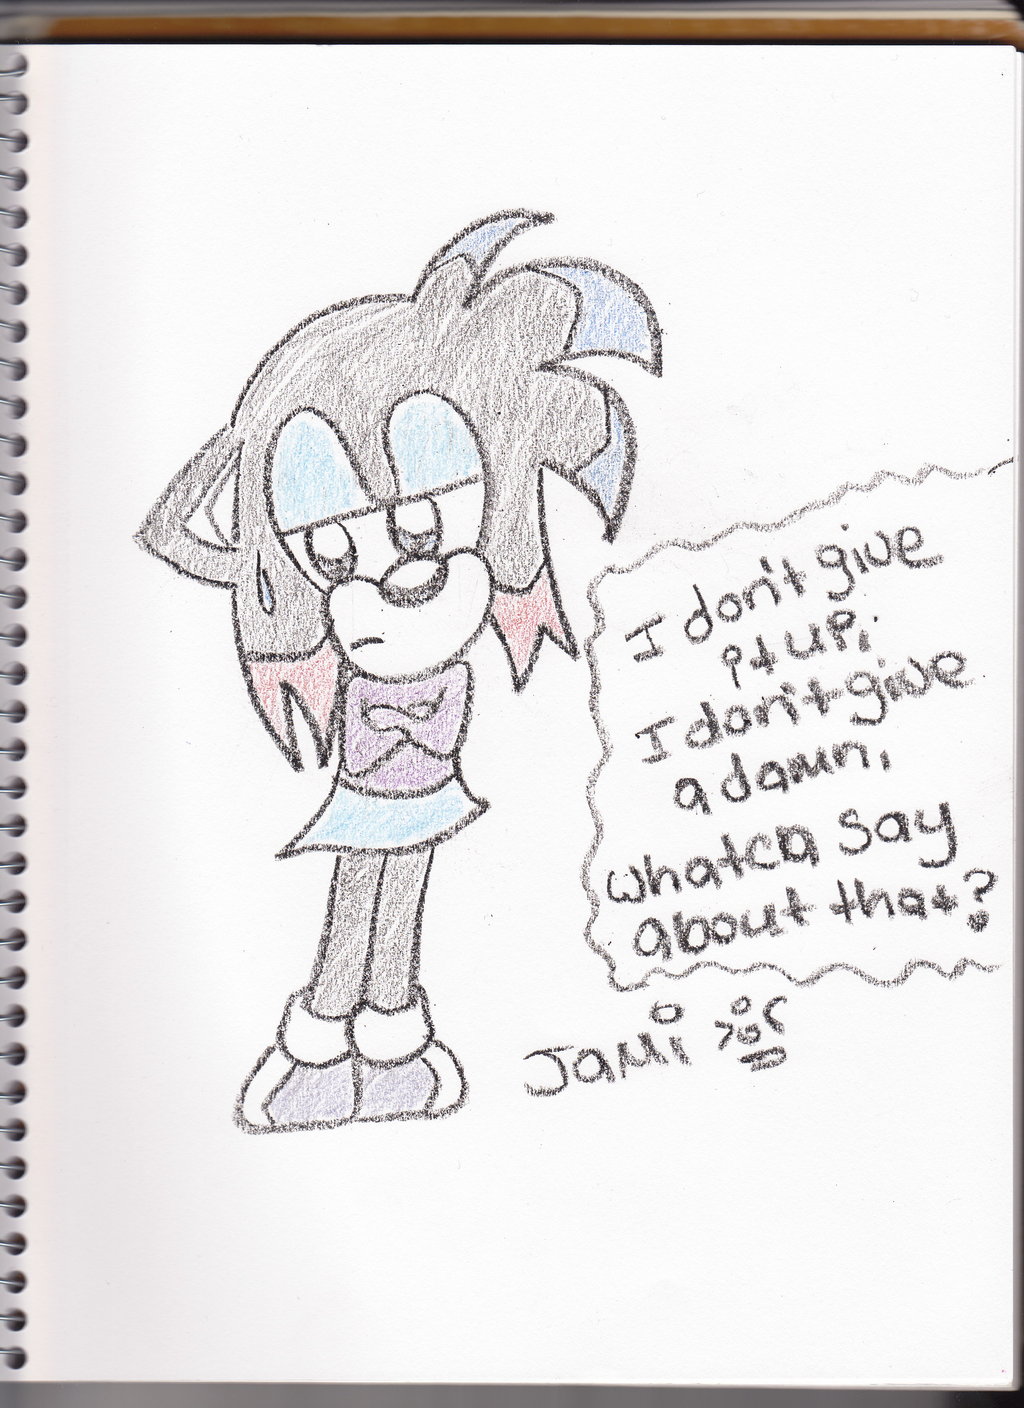 Jami Doesn't Give a Damn by jamimoondragon